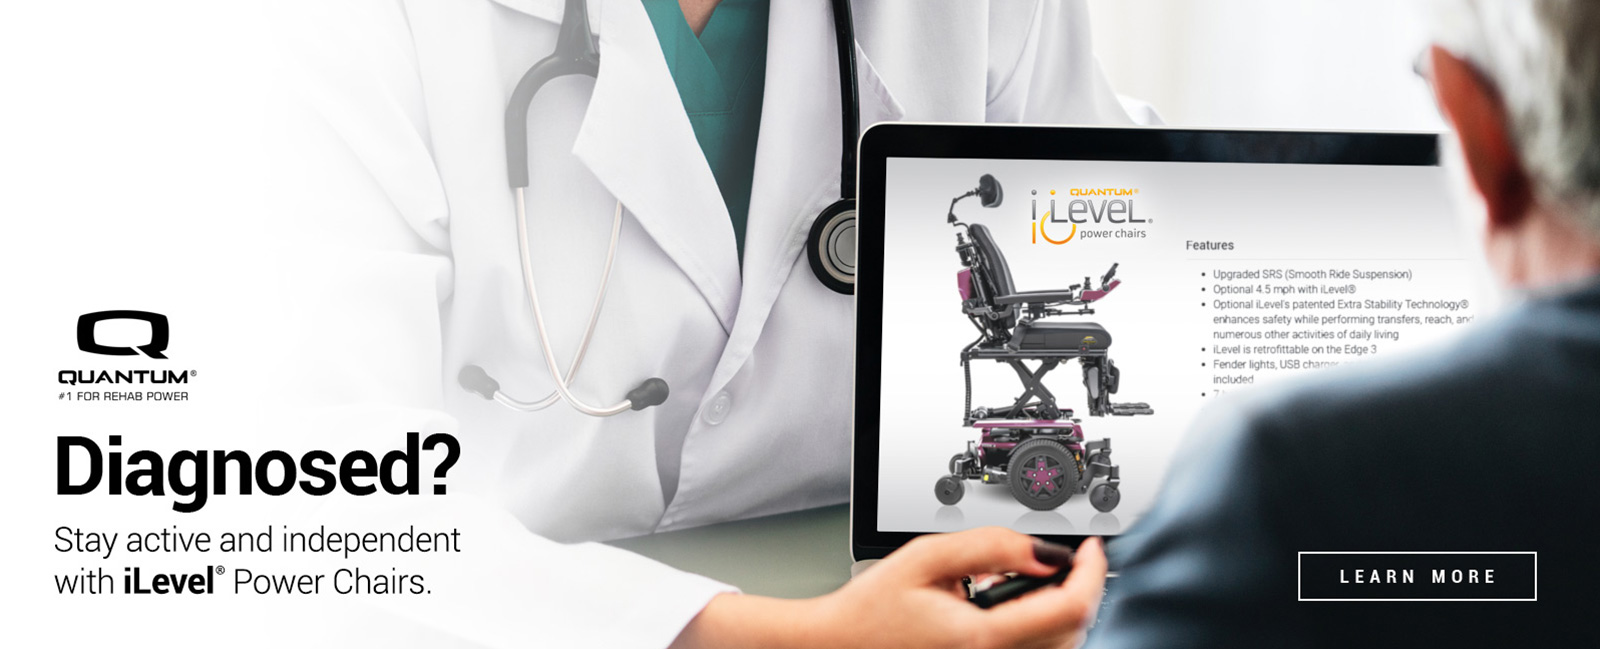 Stay active and independent with iLevel Power Chairs.